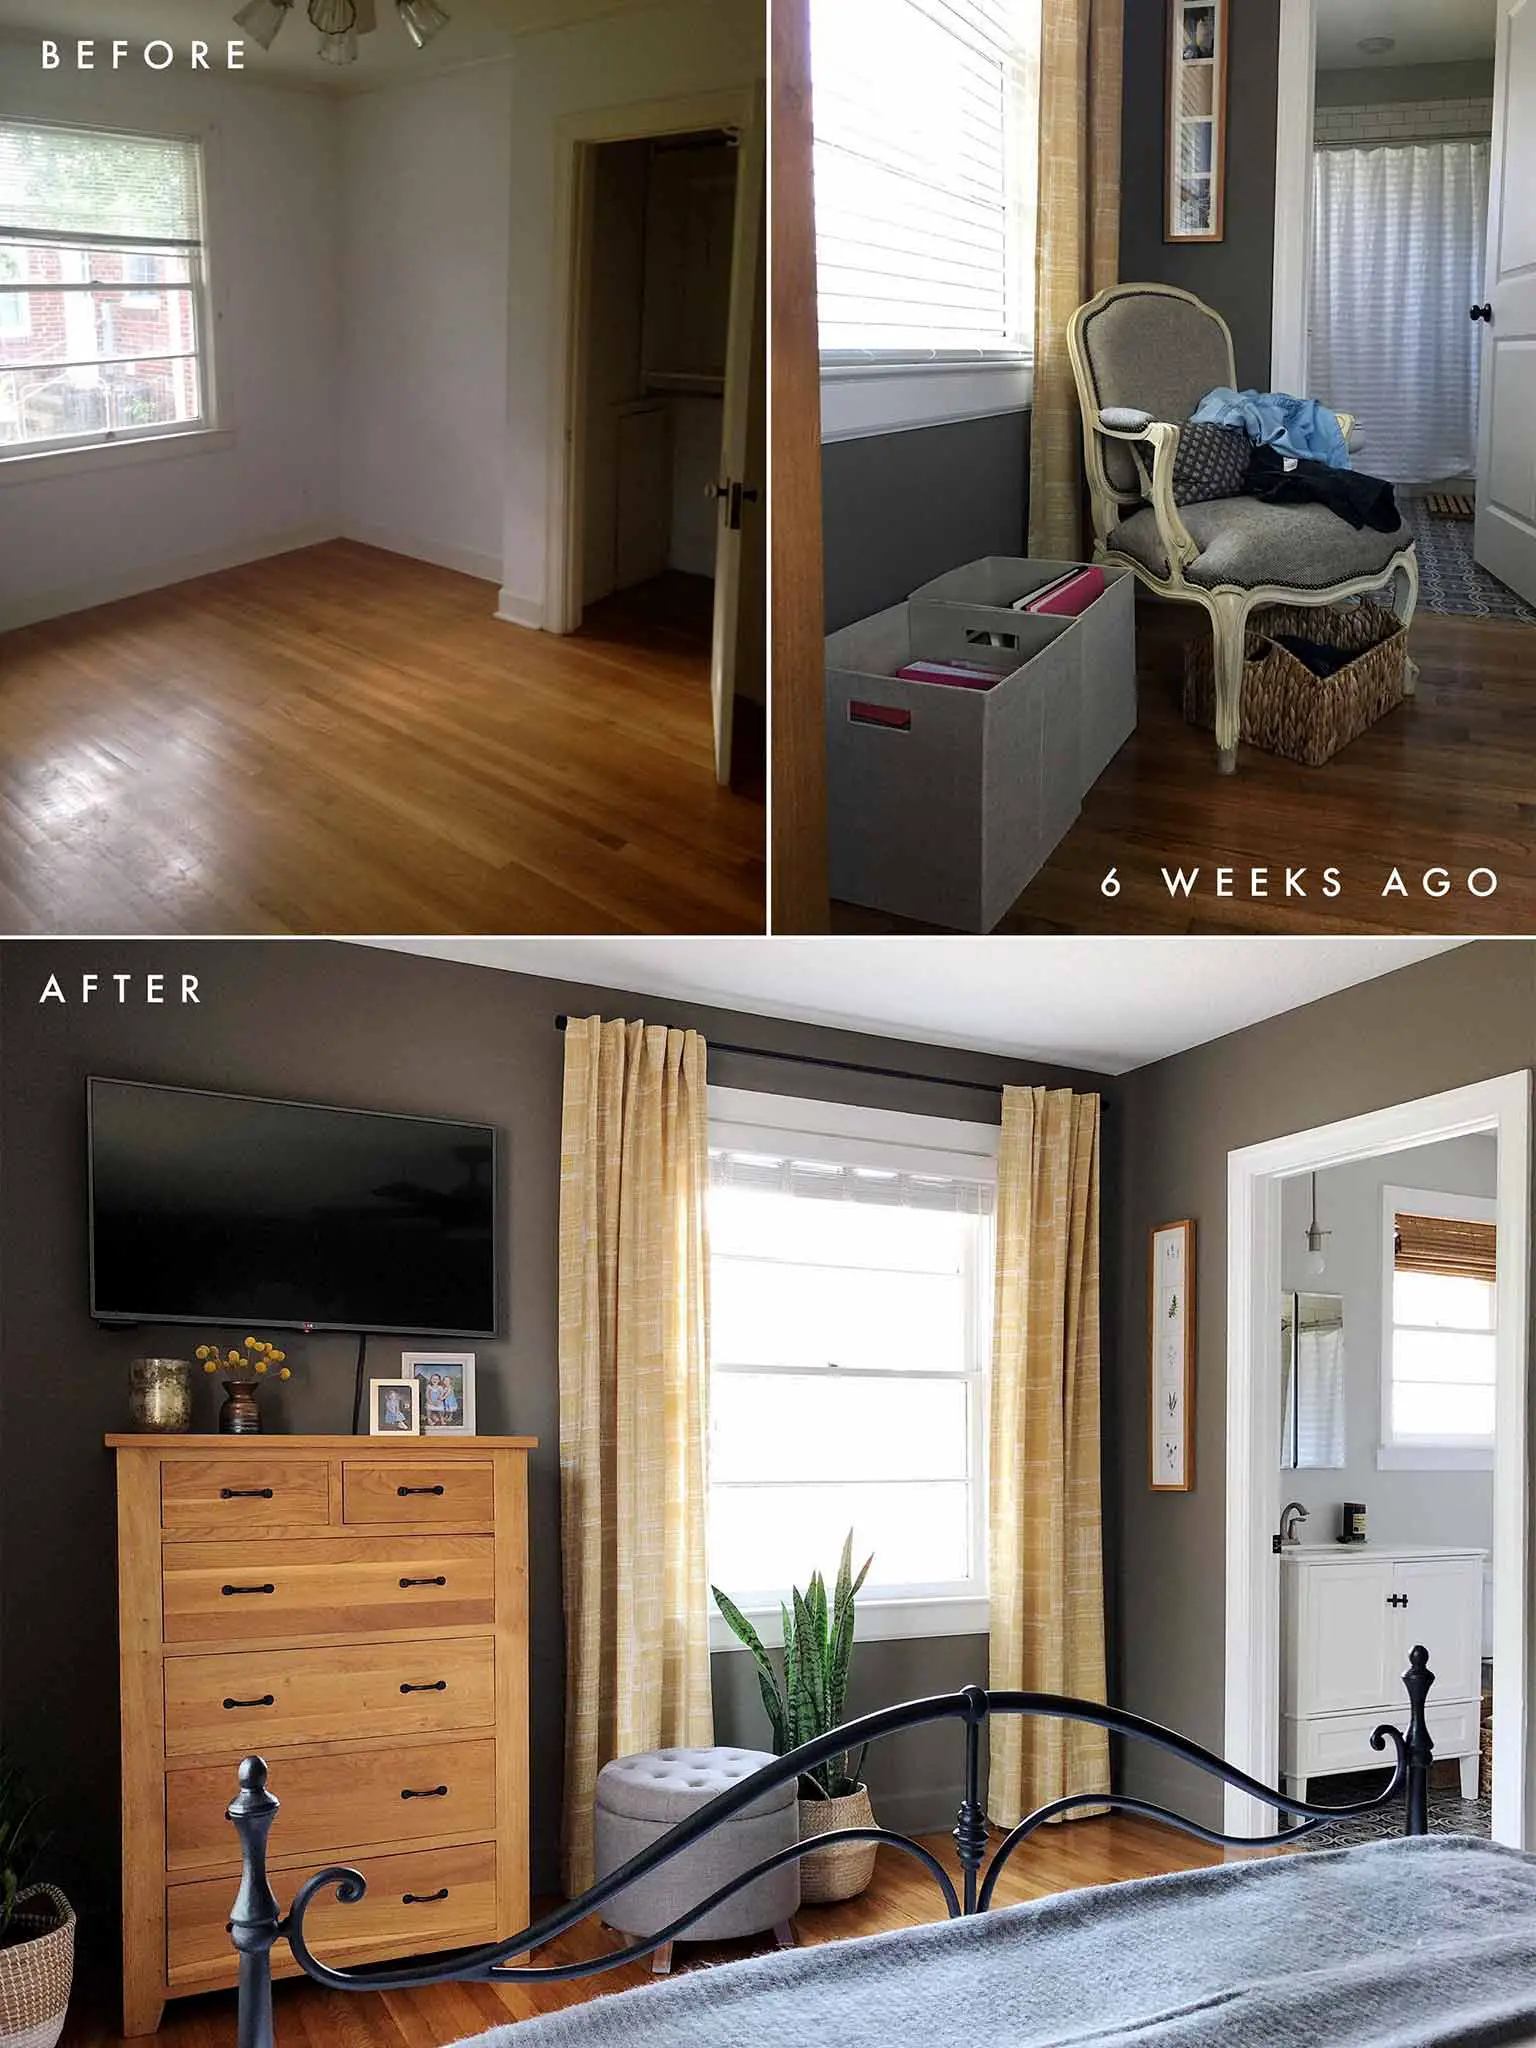 Master Bedroom Before and After - The One Room Challenge - That Homebird Life Blog